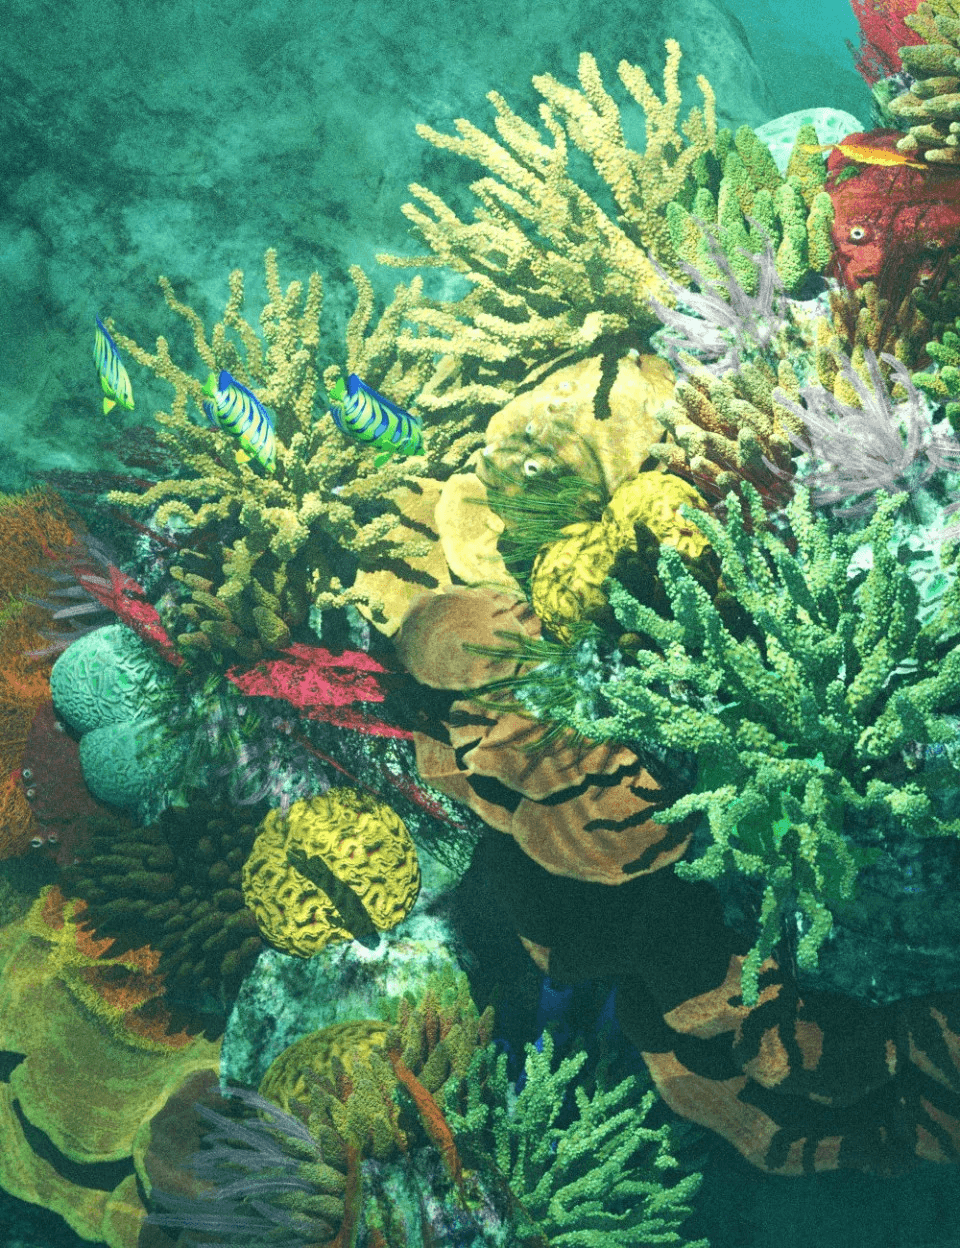 v176-iray-coral-reef